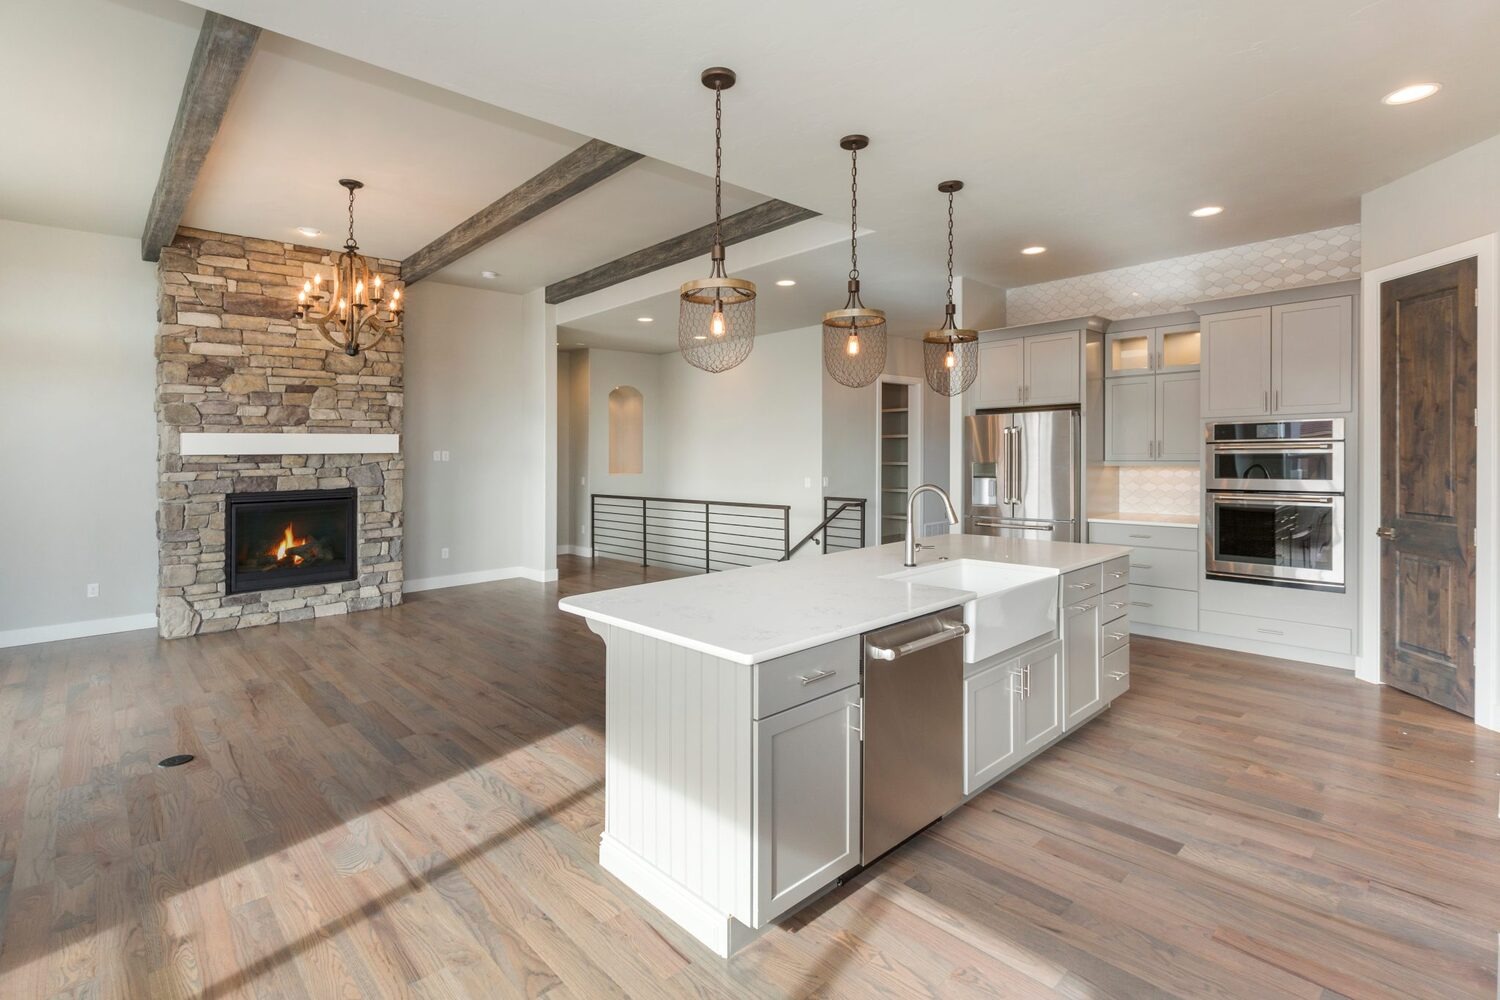 Home remodeling Wilmette project created a new living space with an open kitchen